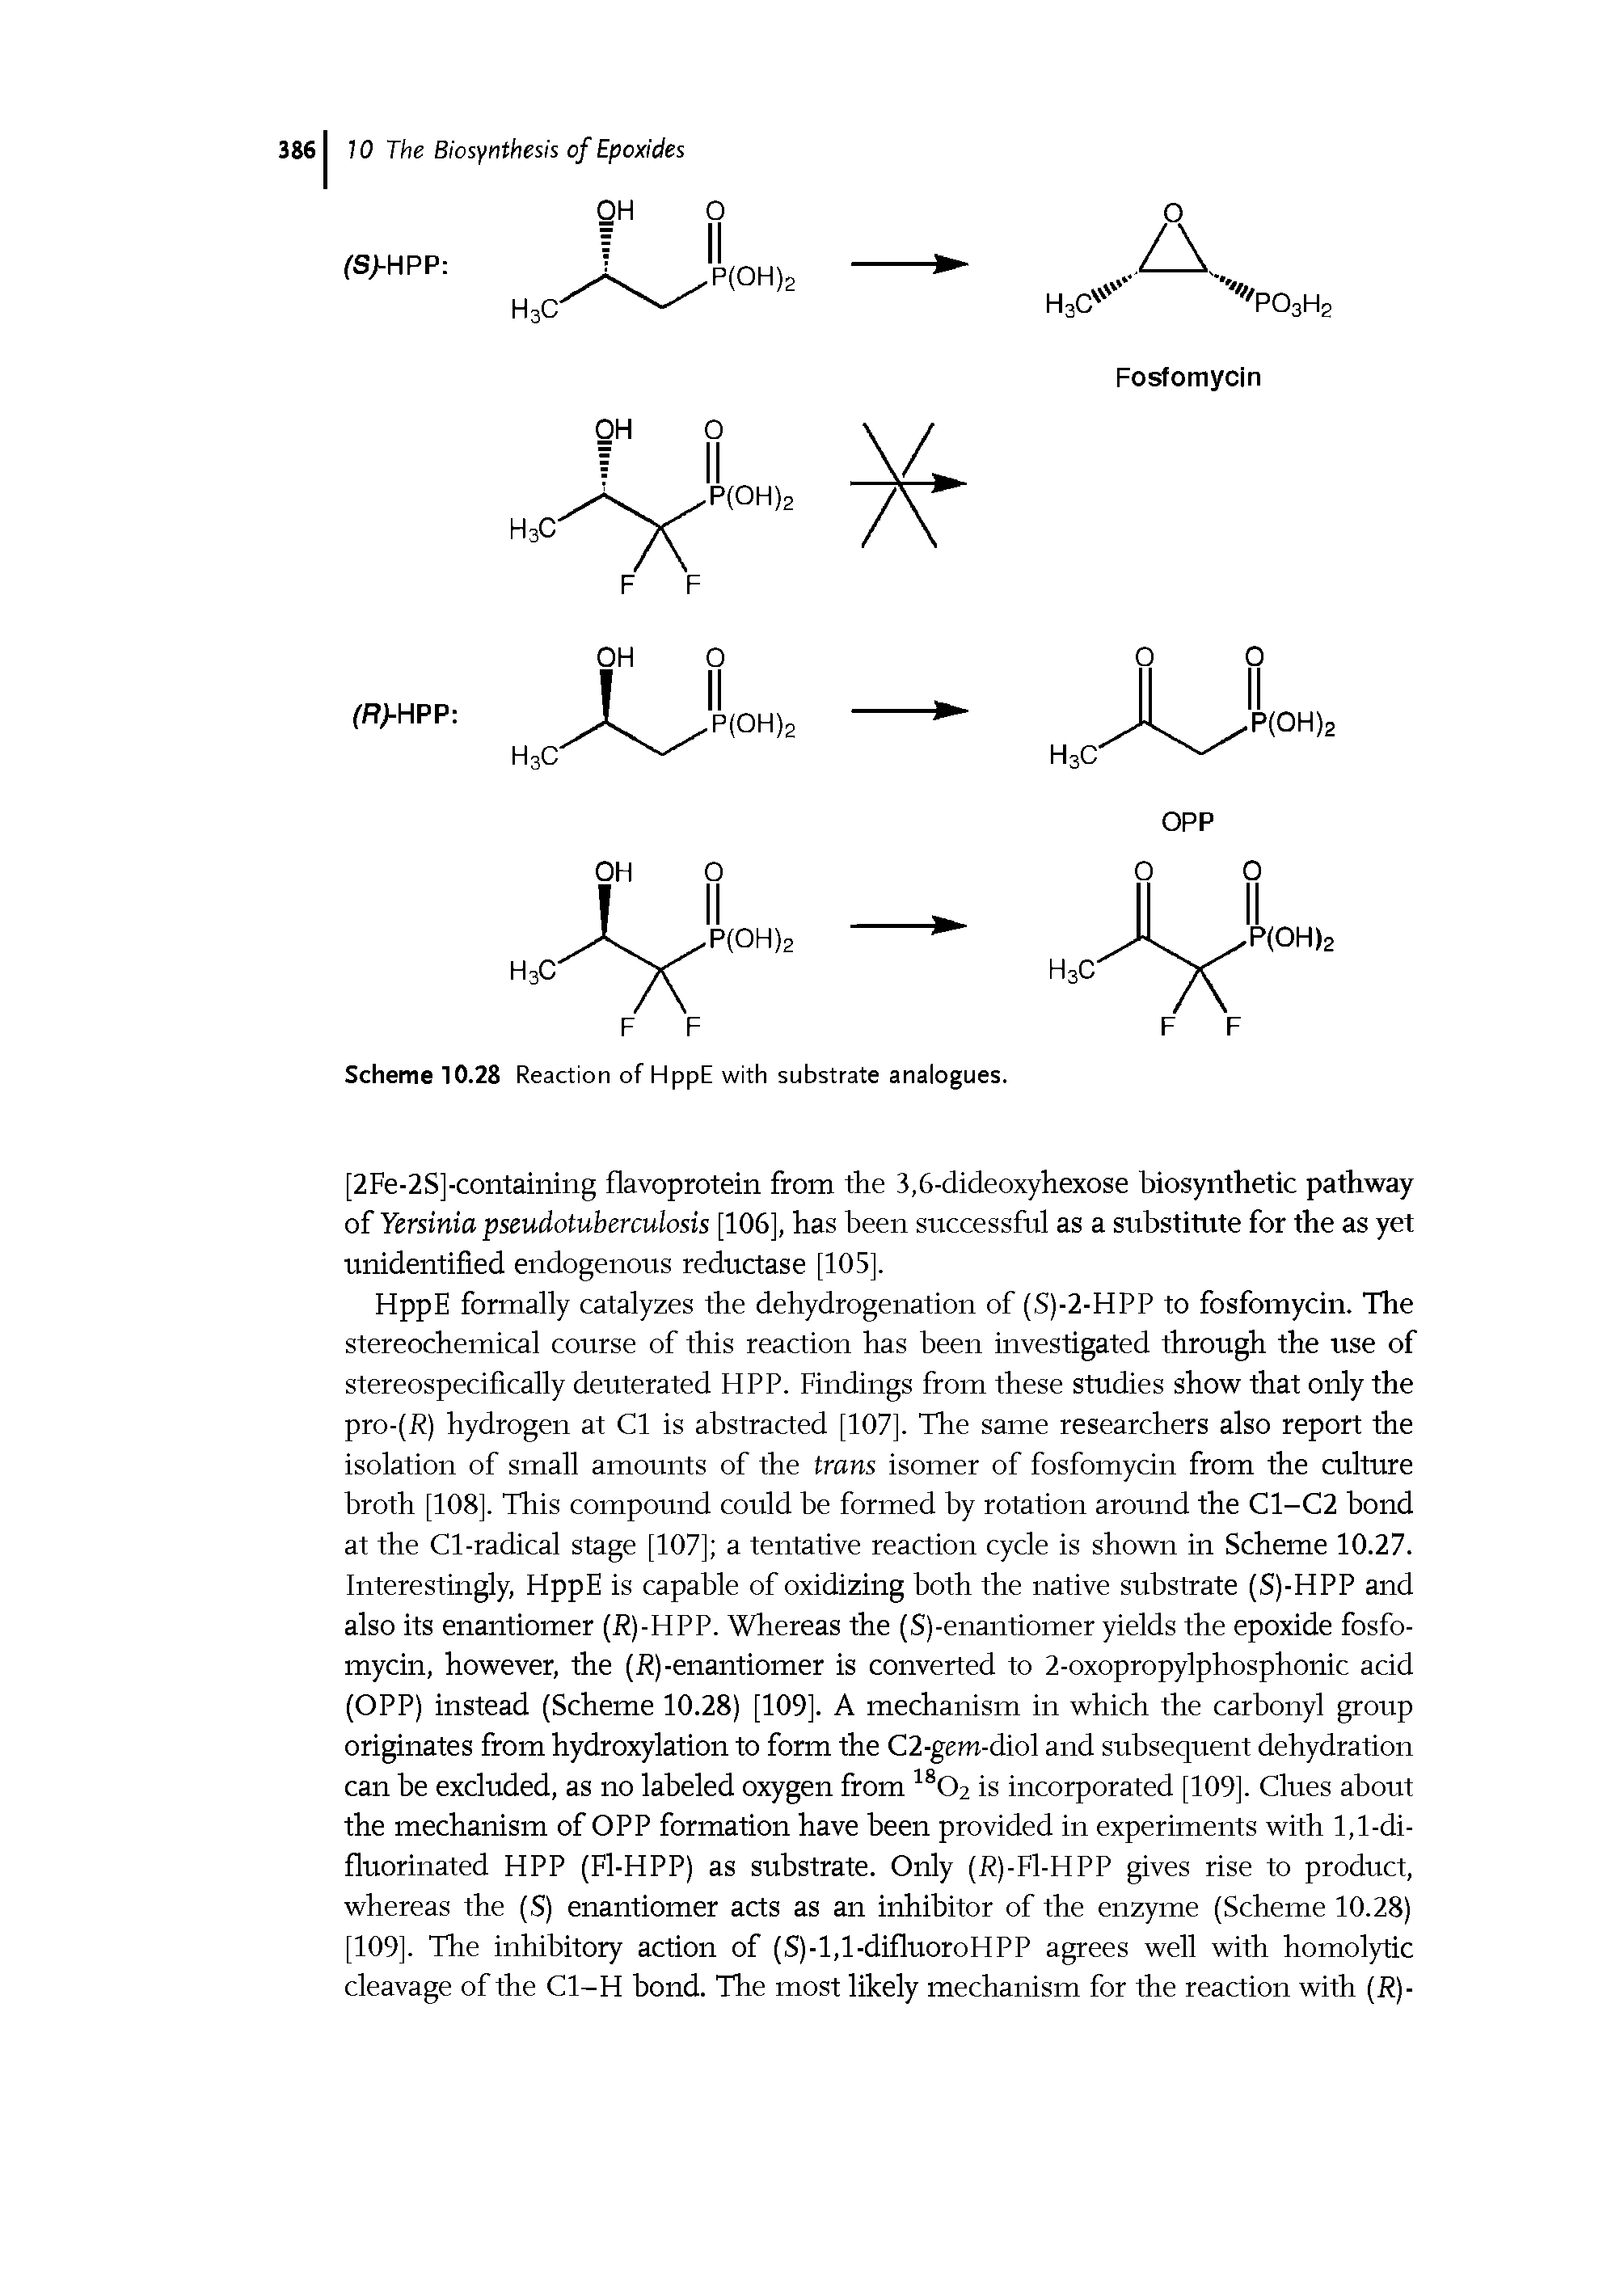 Scheme 10.28 Reaction of HppE with substrate analogues.